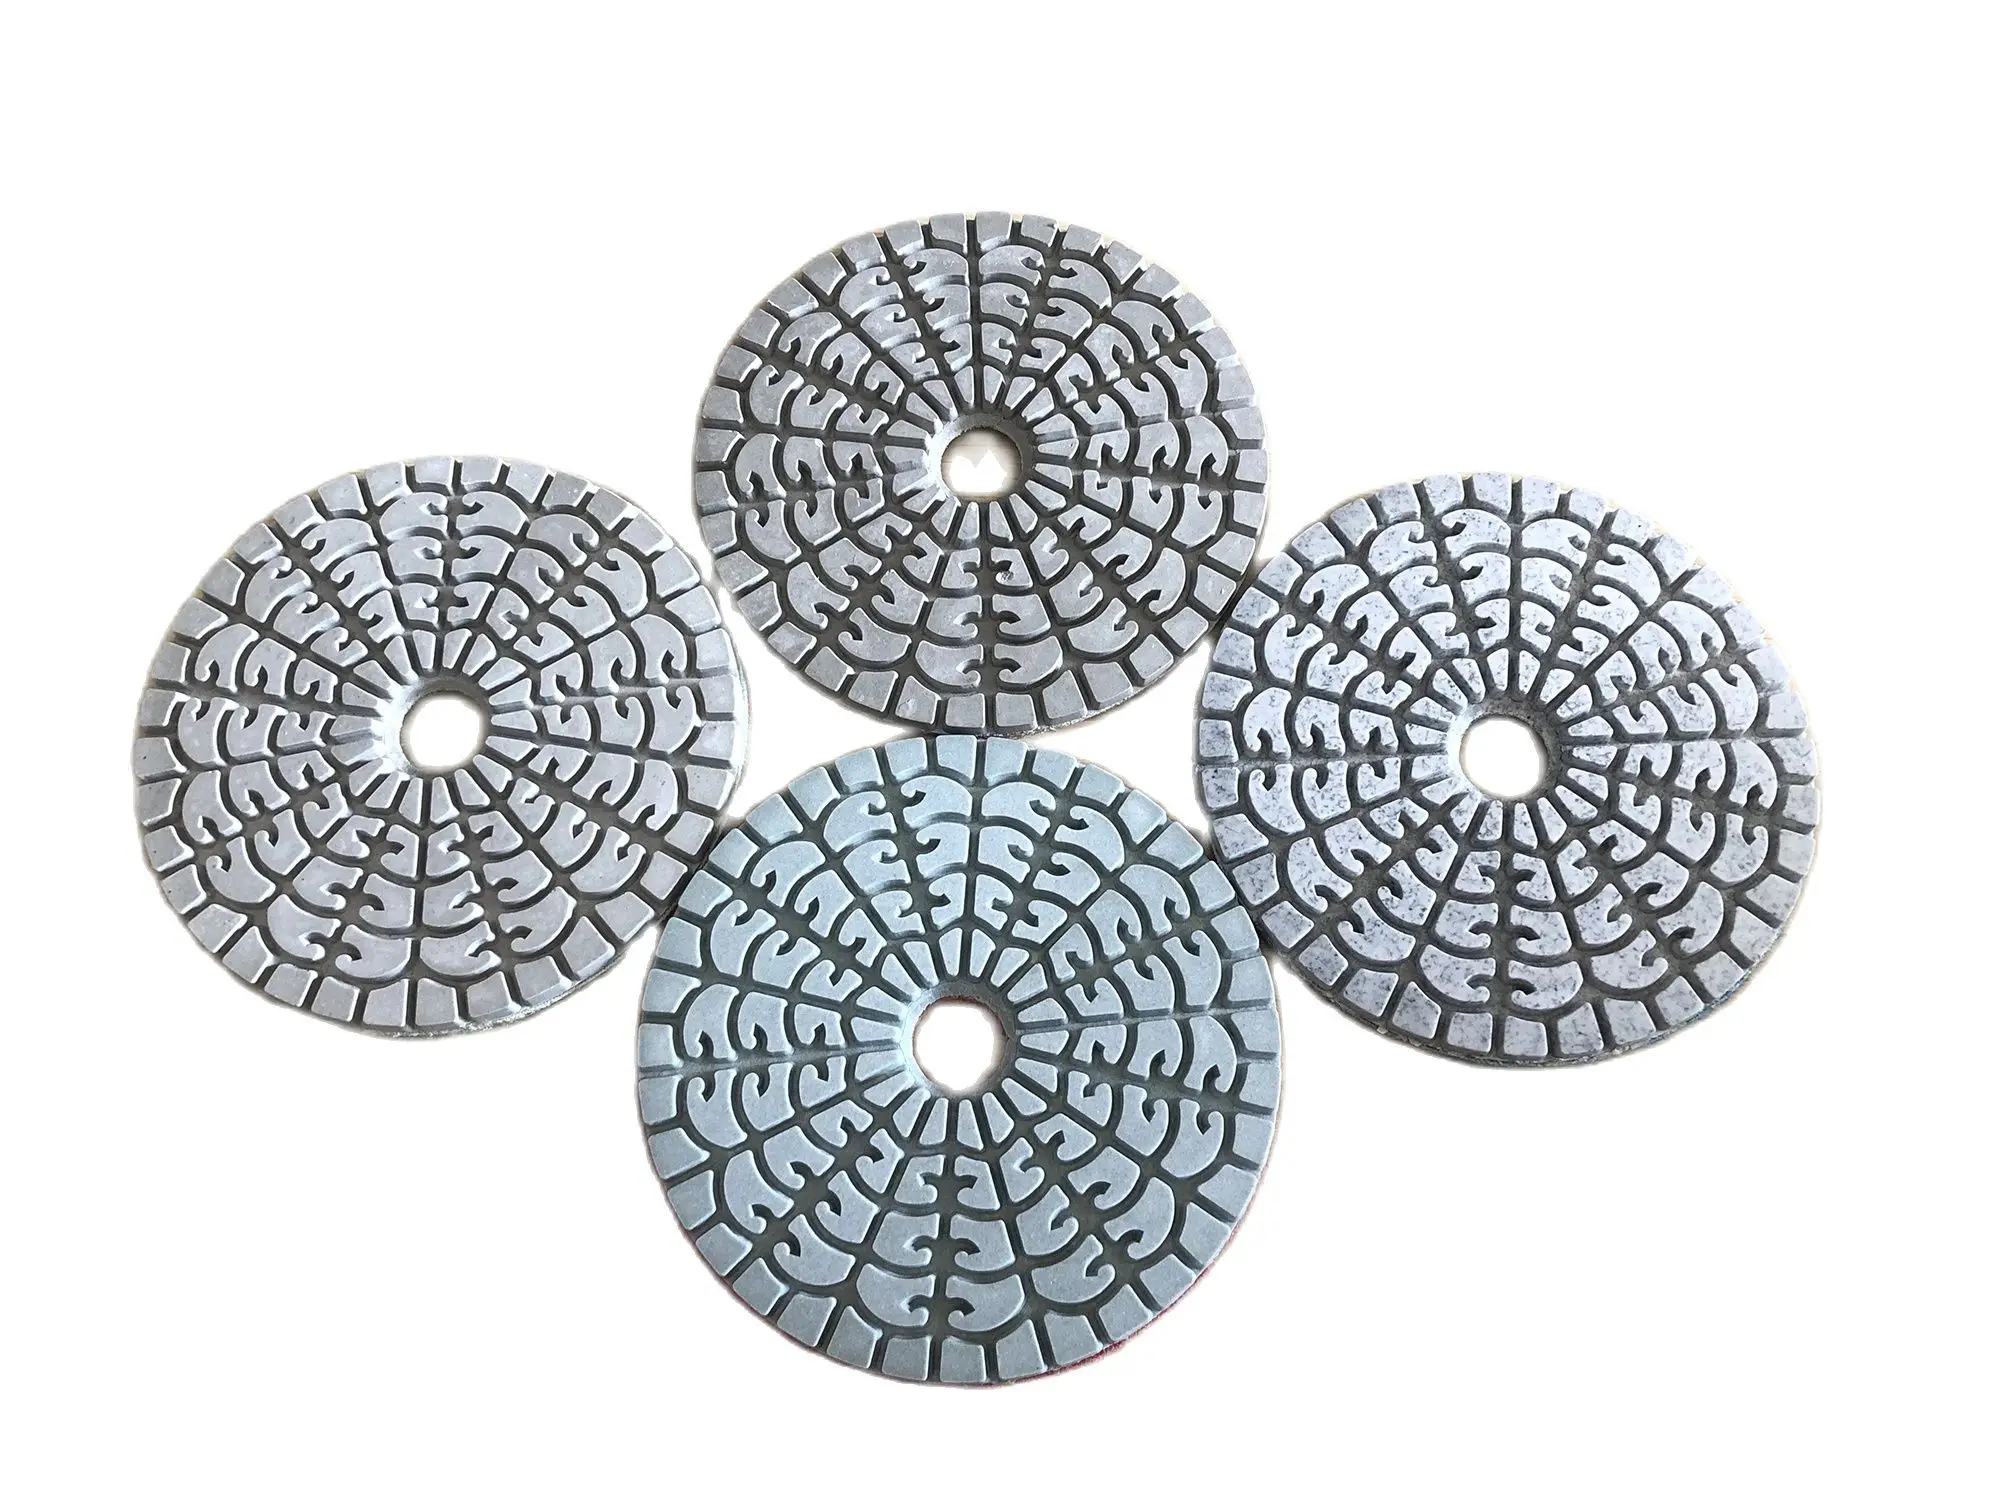 7Pieces 4 Inch Diamond Wet Polishing Pad Abrasive Sheet Disc For Grinding Cleaning Granite Stone Concrete Marble Ceramic Tile